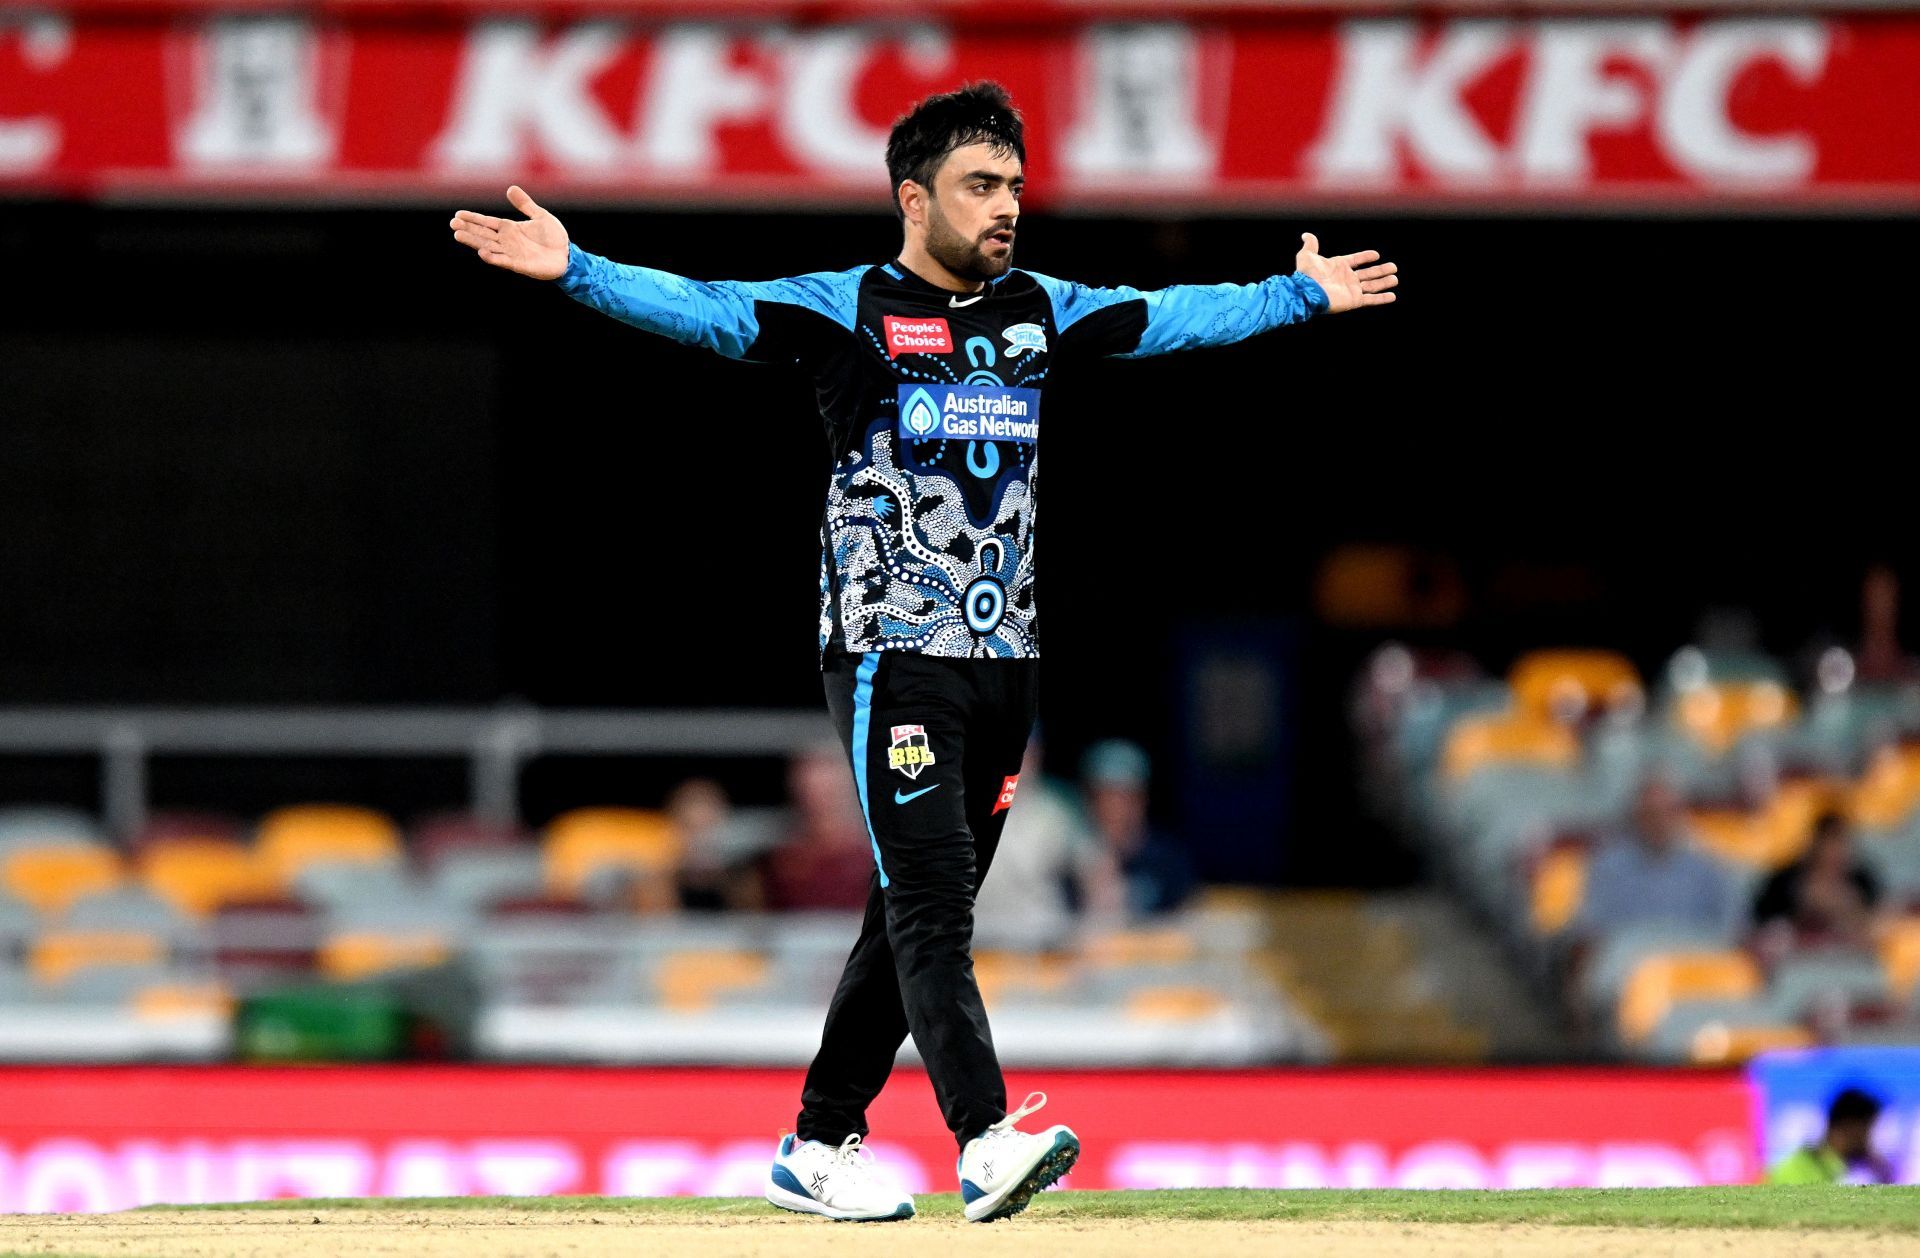 Rashid Khan has been playing for the Adelaide Strikers since 2017-18. (Credits: Getty)